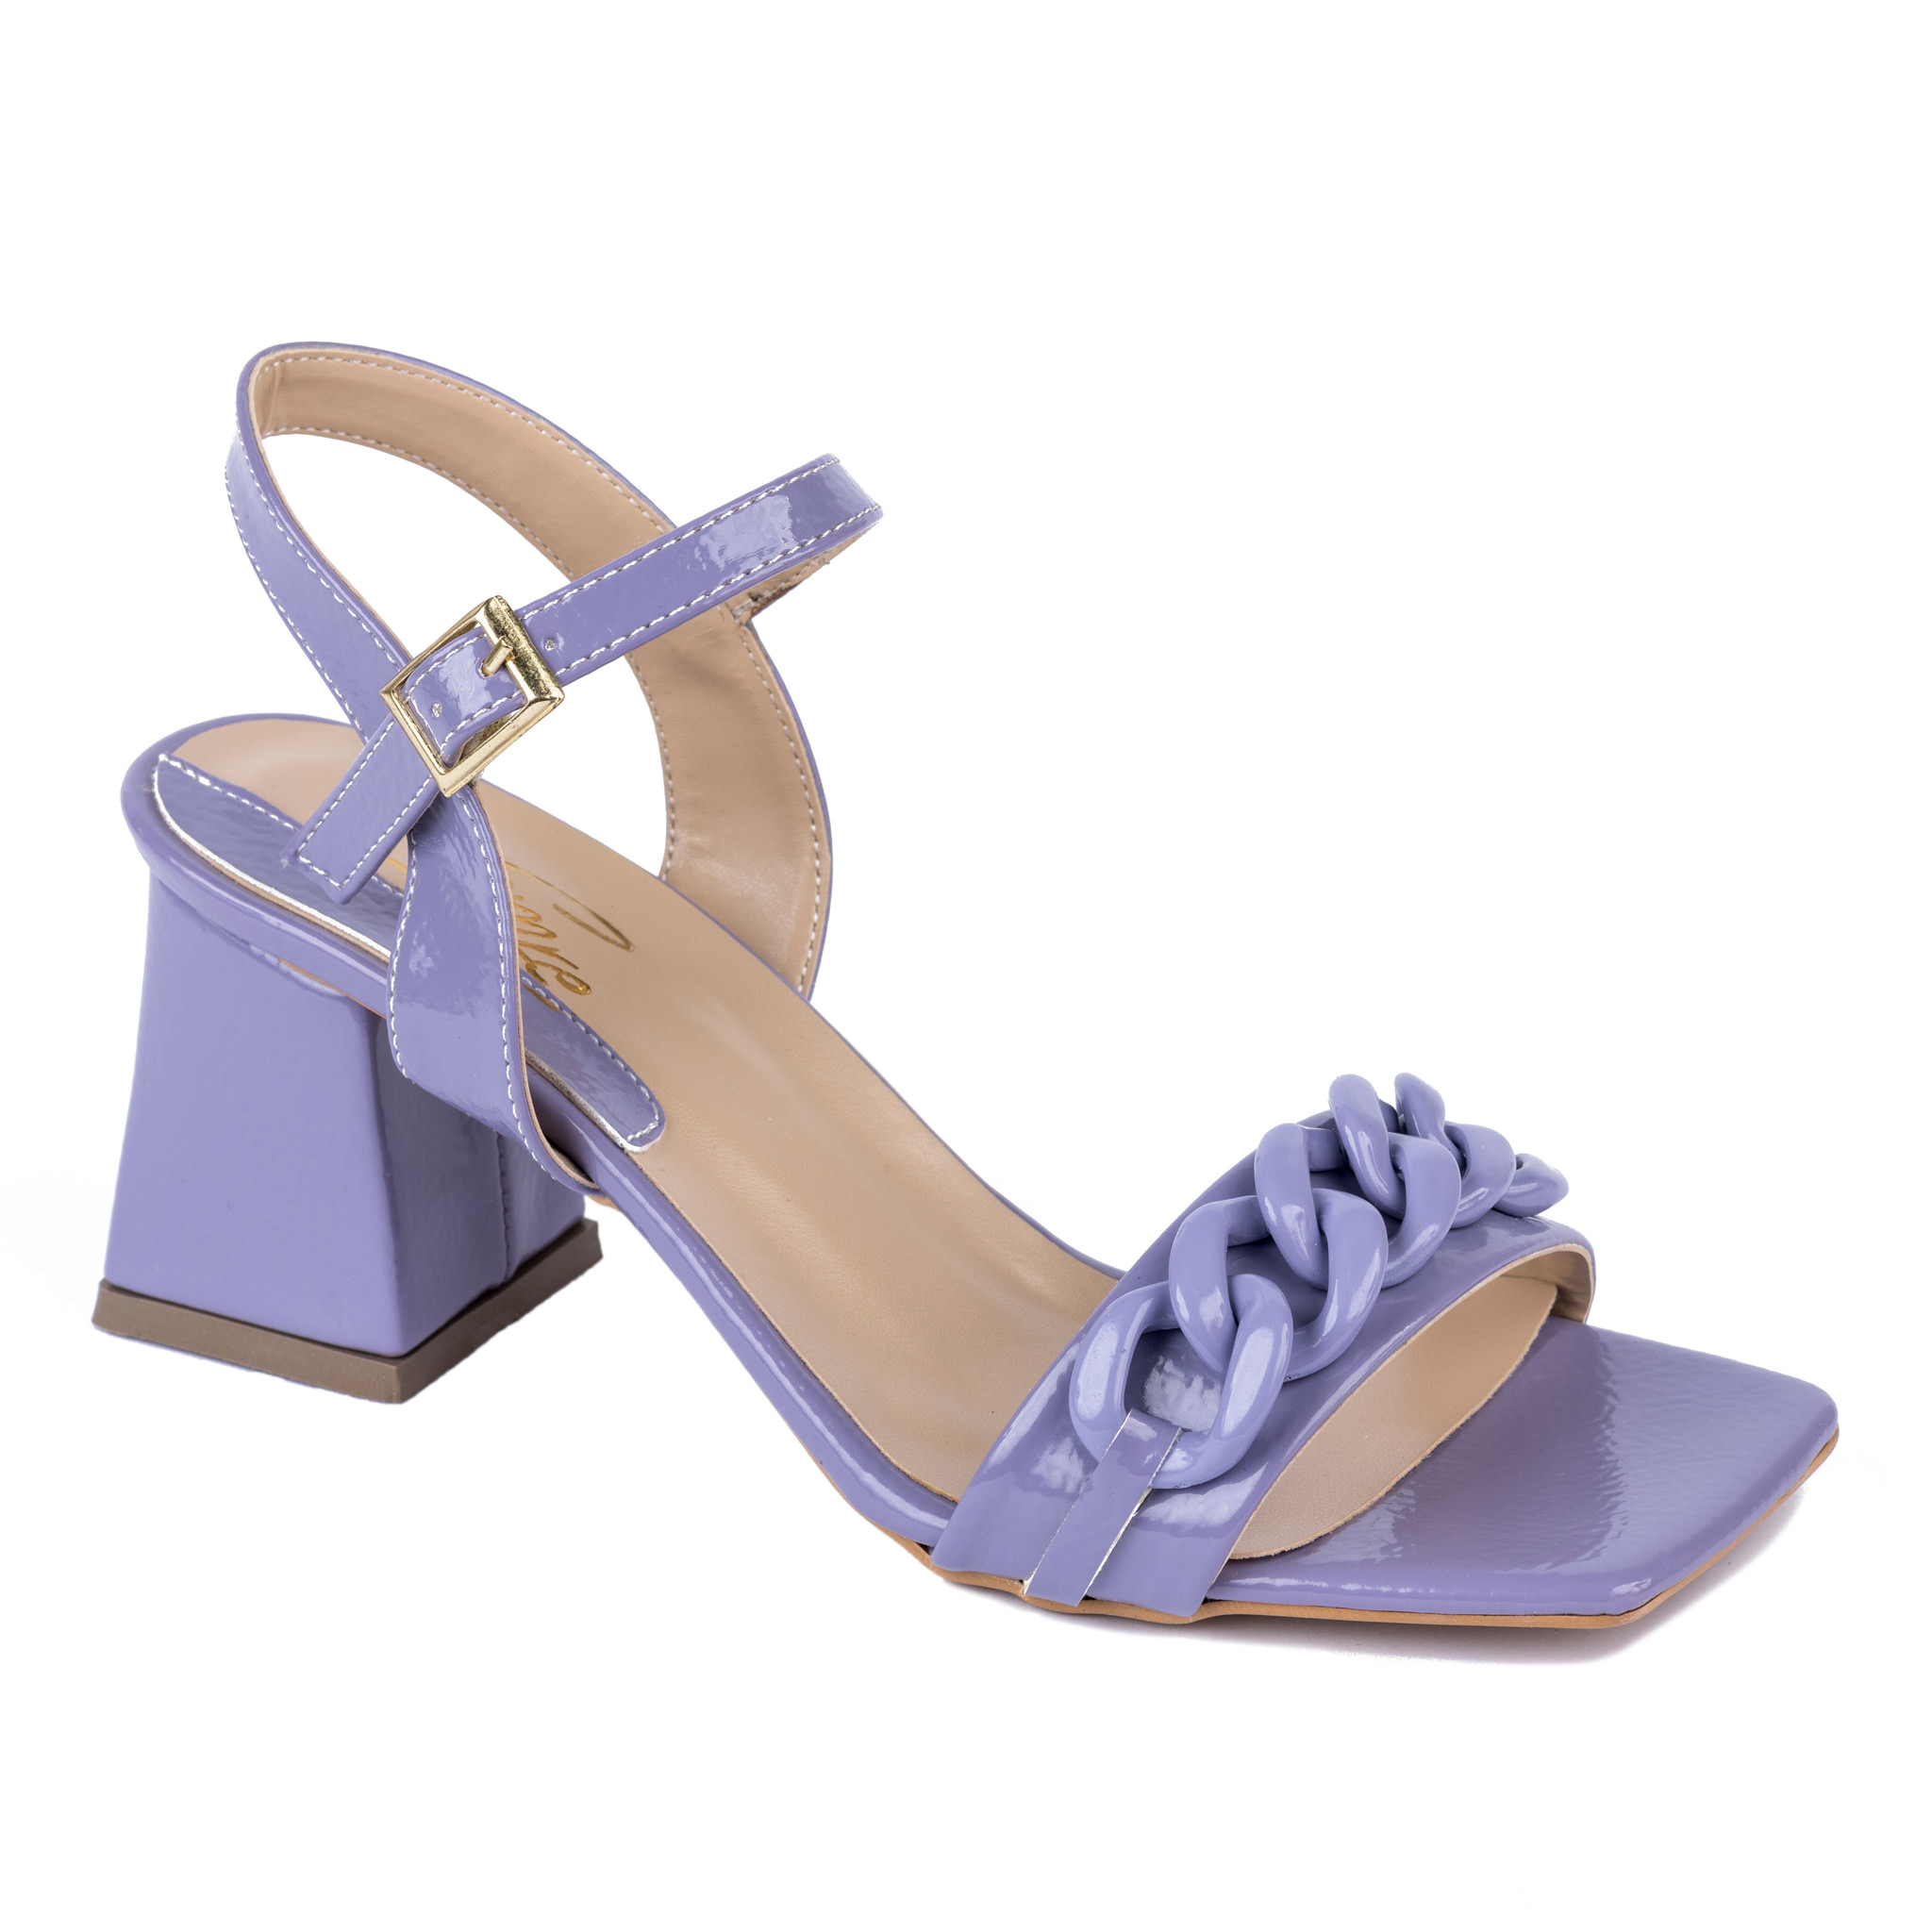 THICK HEEL SANDALS WITH CHAIN - PURPLE